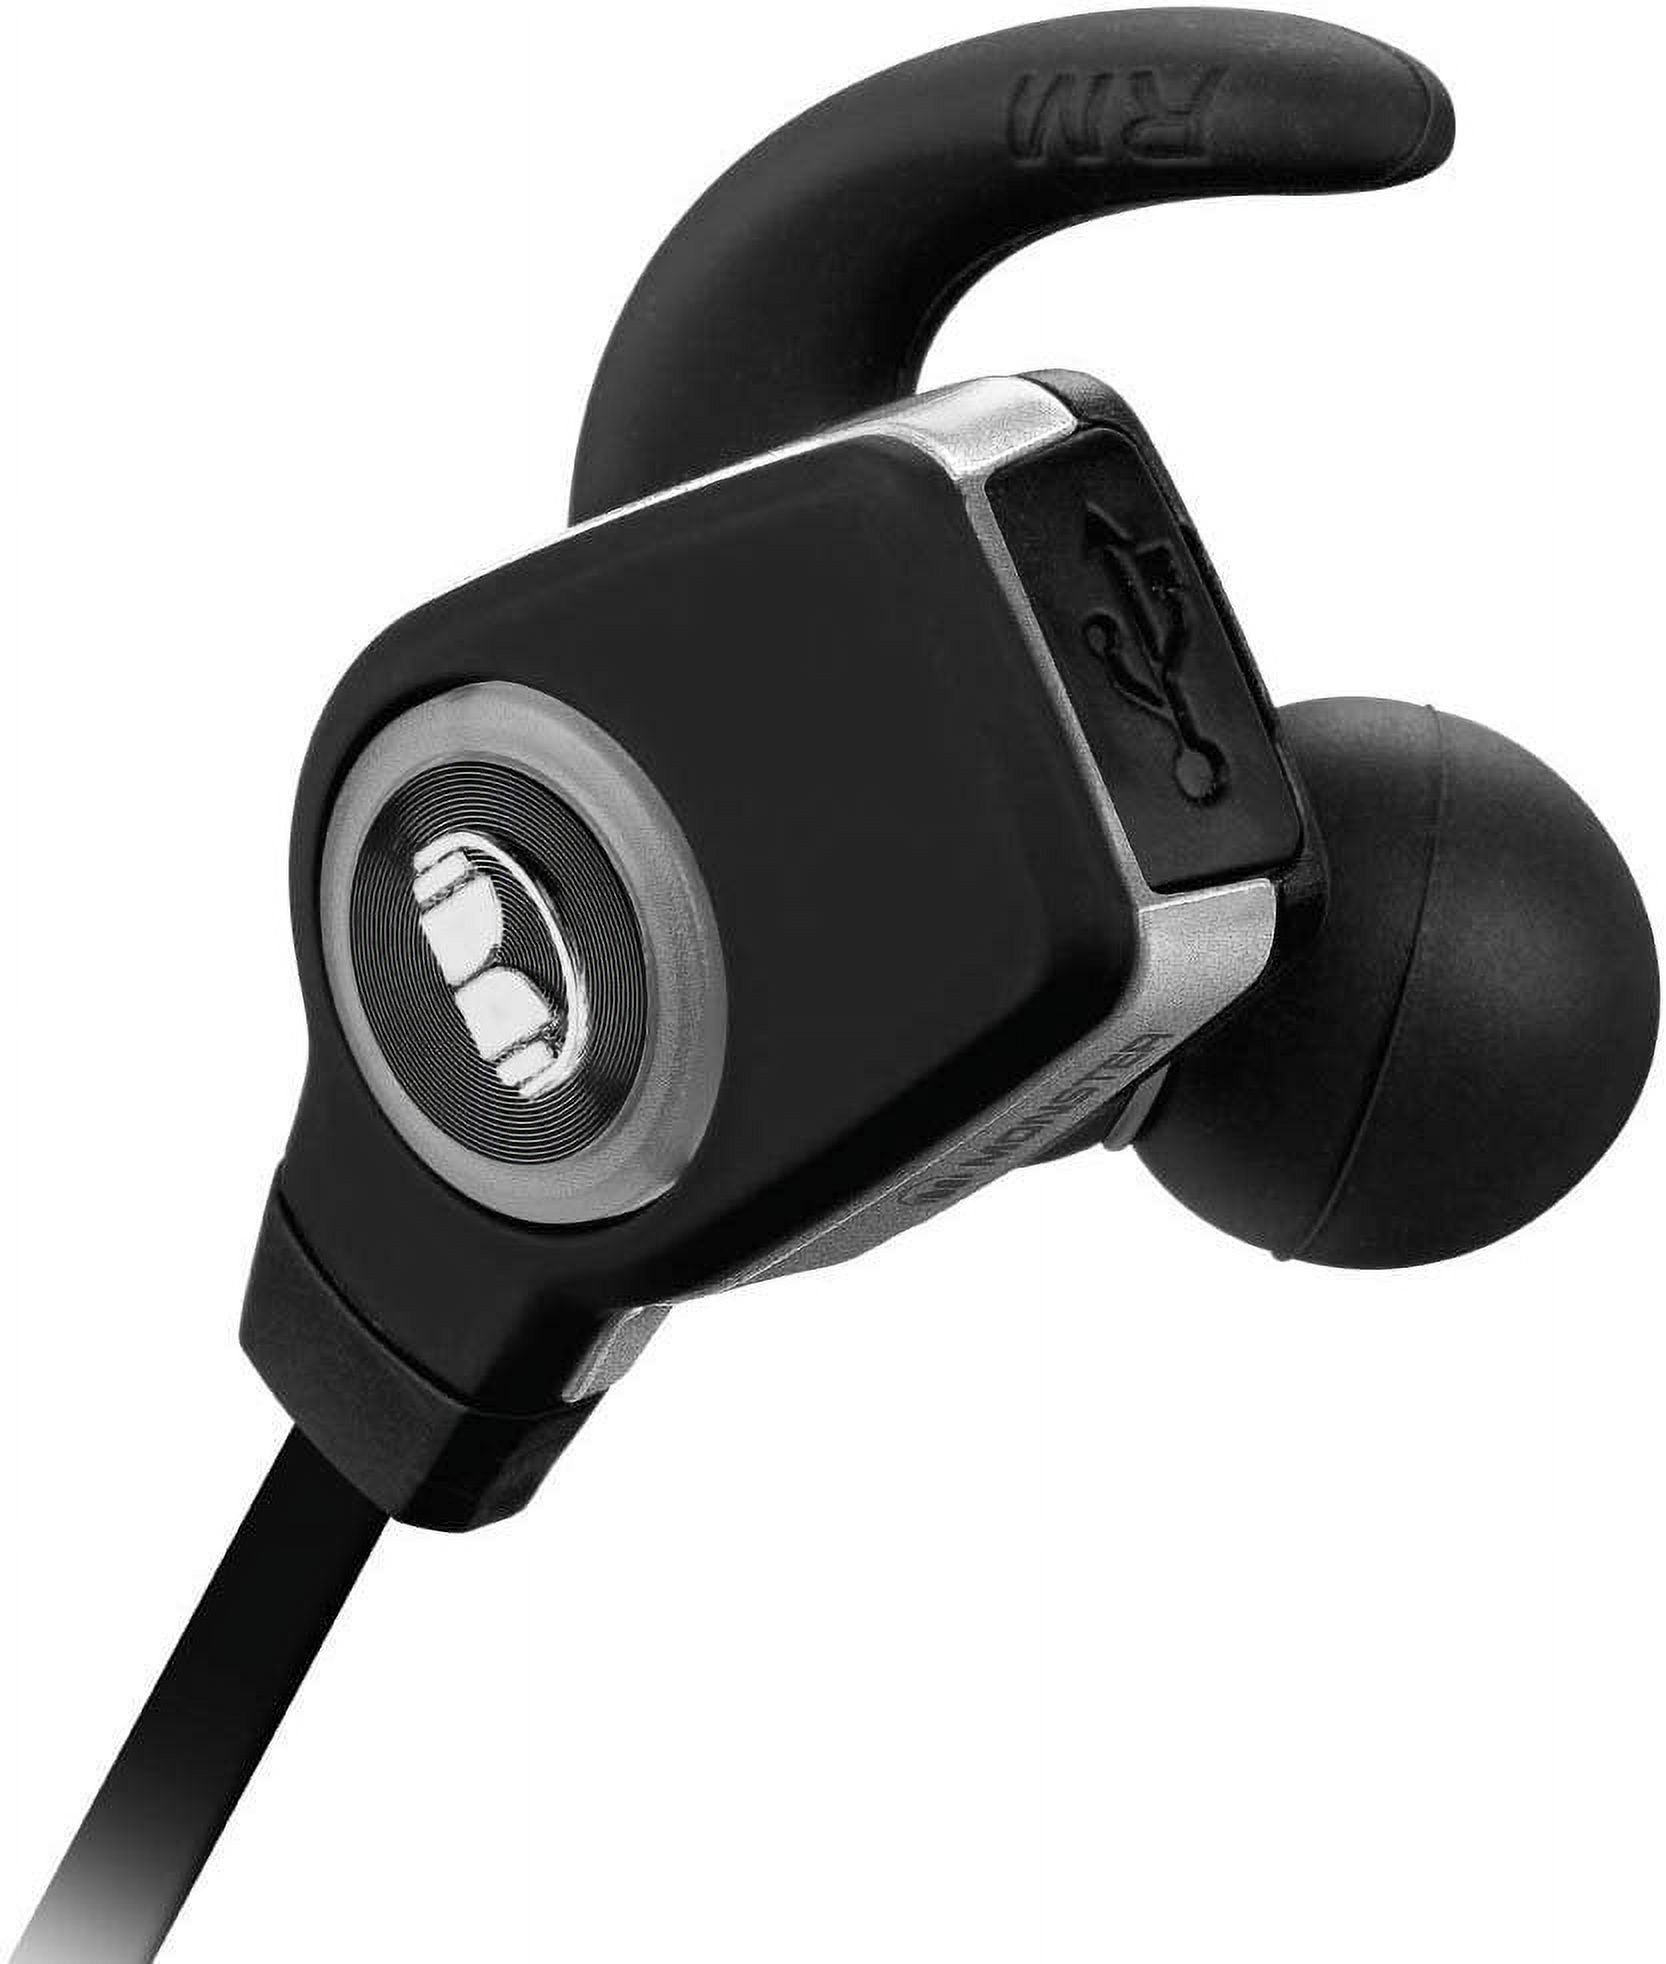 Monster Cable iSport SuperSlim Earset - image 2 of 5